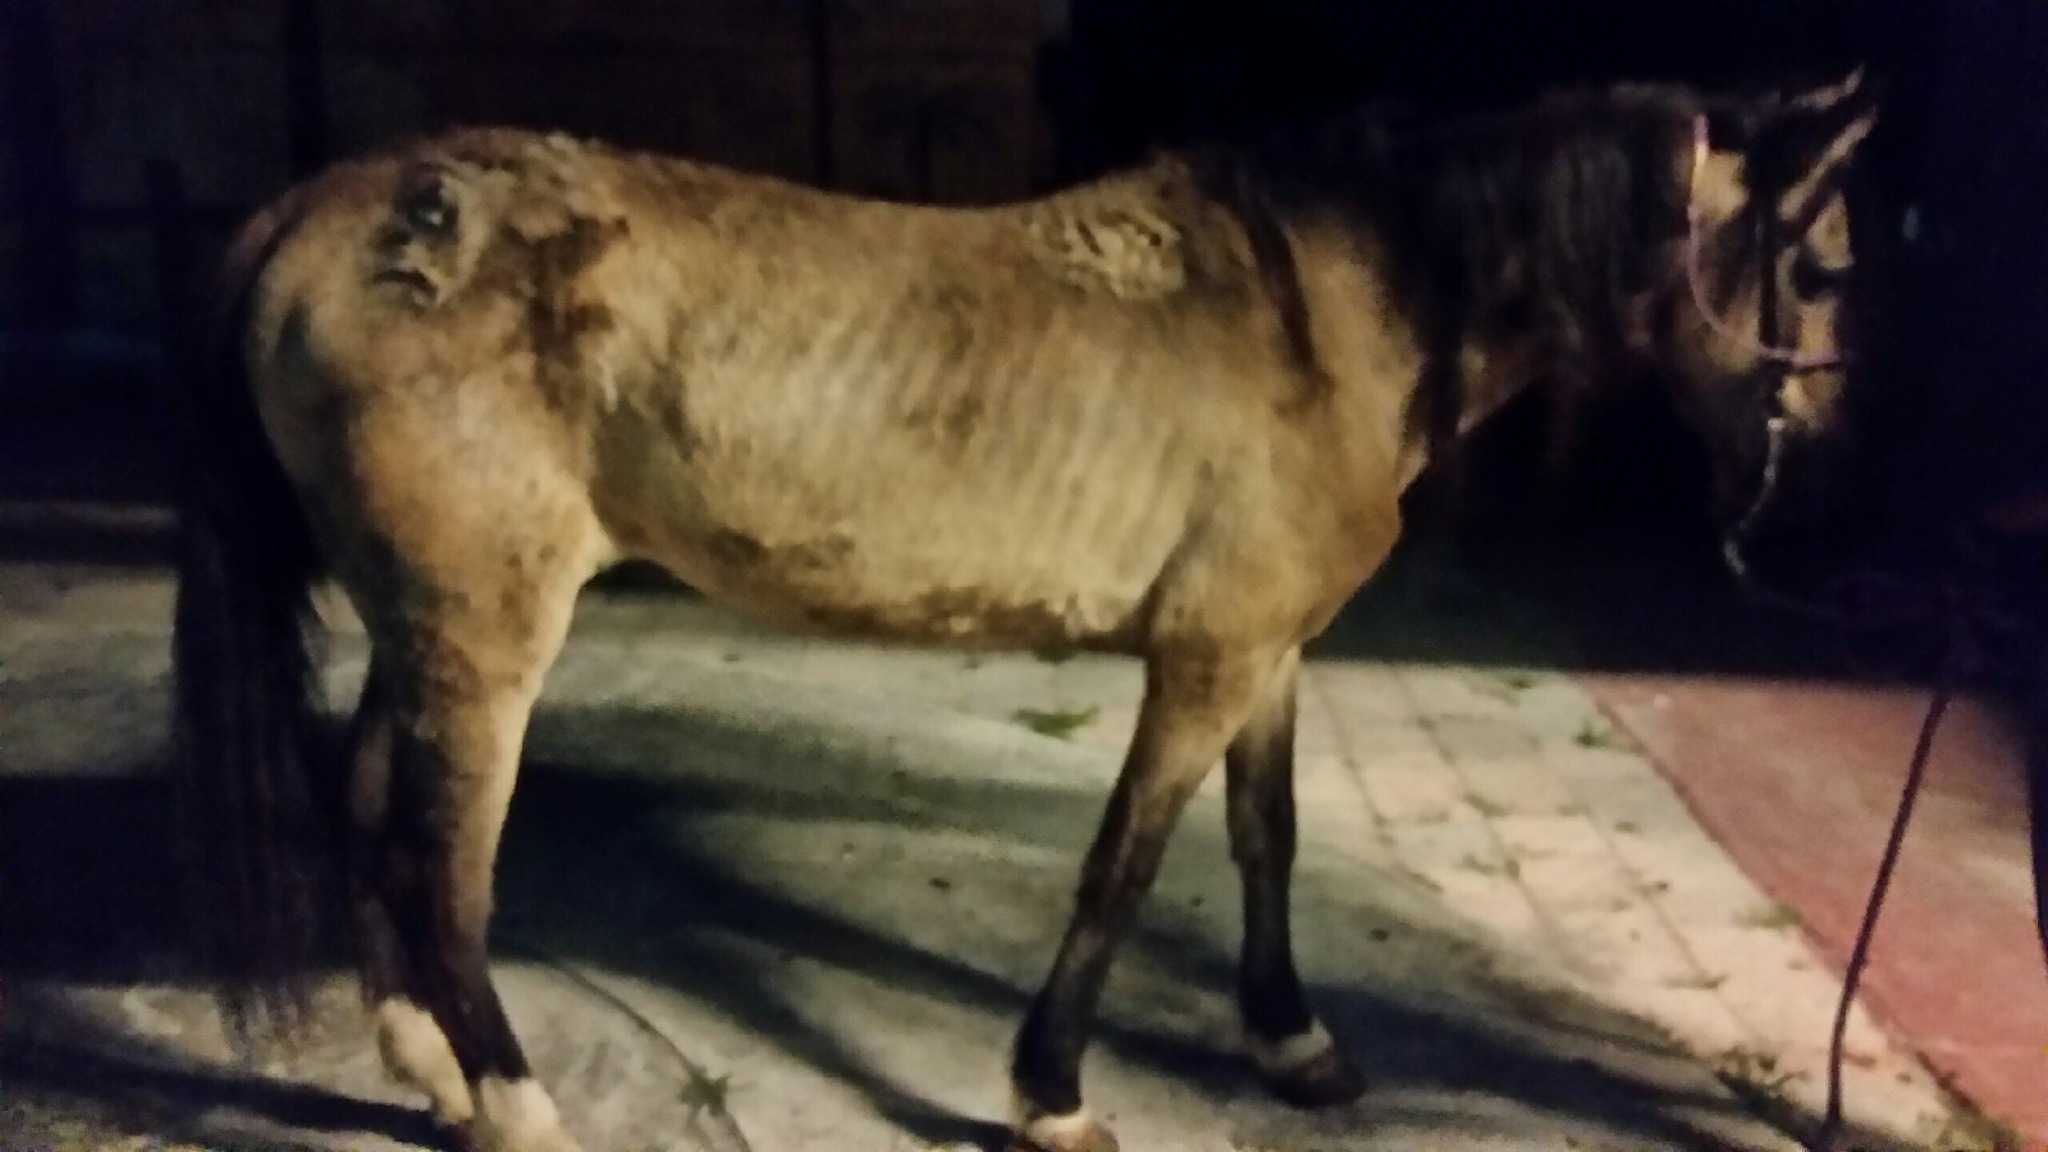 One dead and one malnourished horse discovered at SW Miami Dade residence